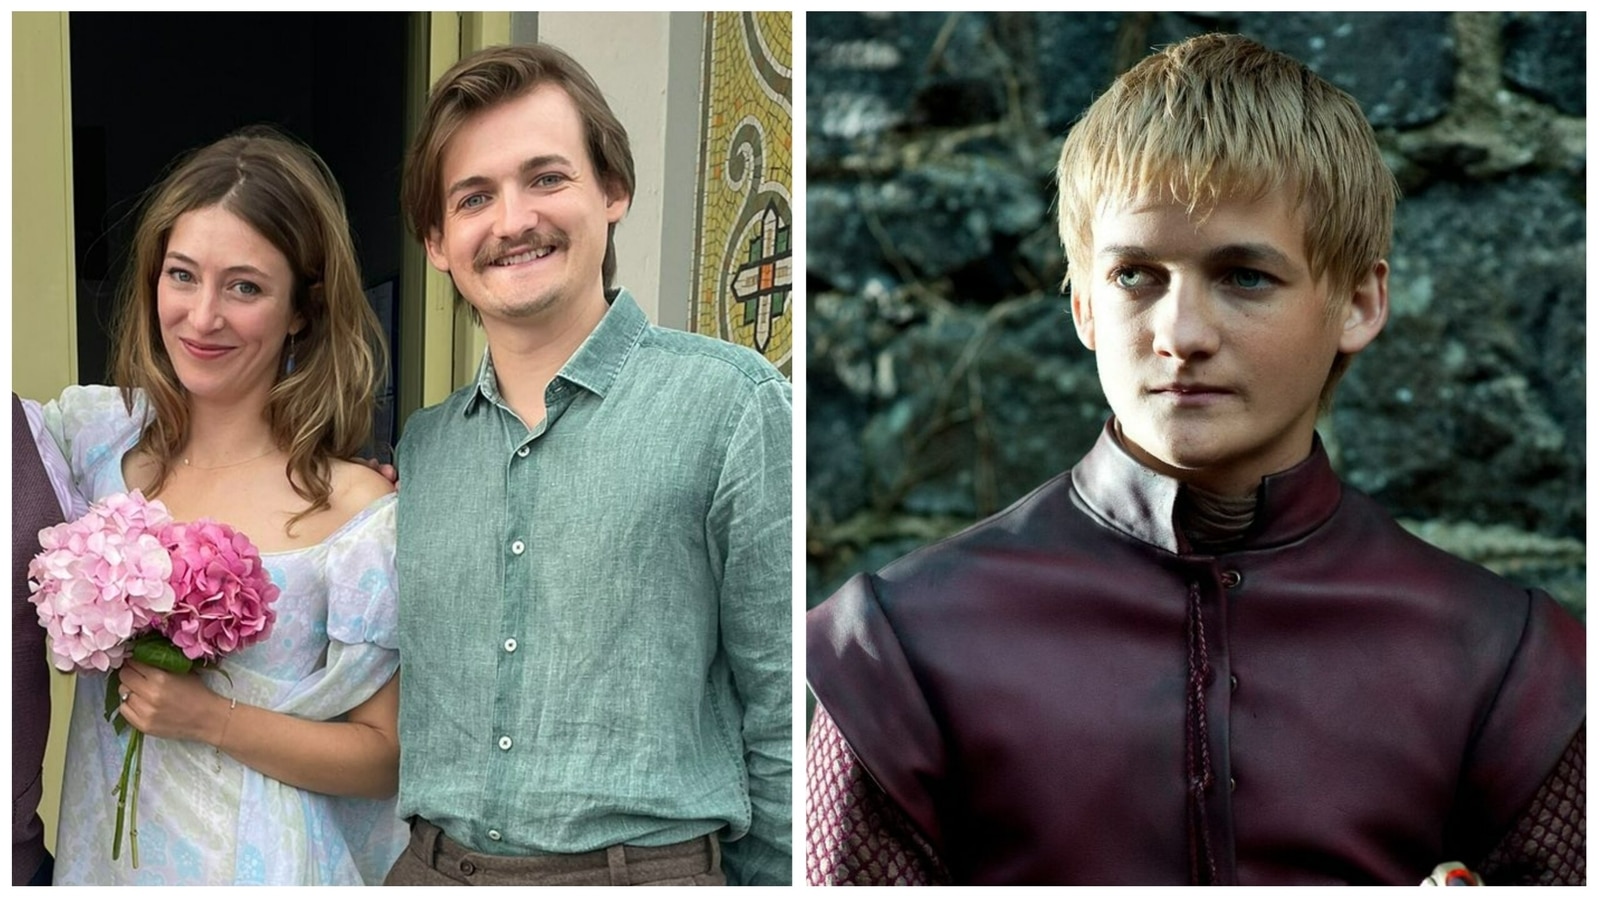 joffrey game of thrones real name